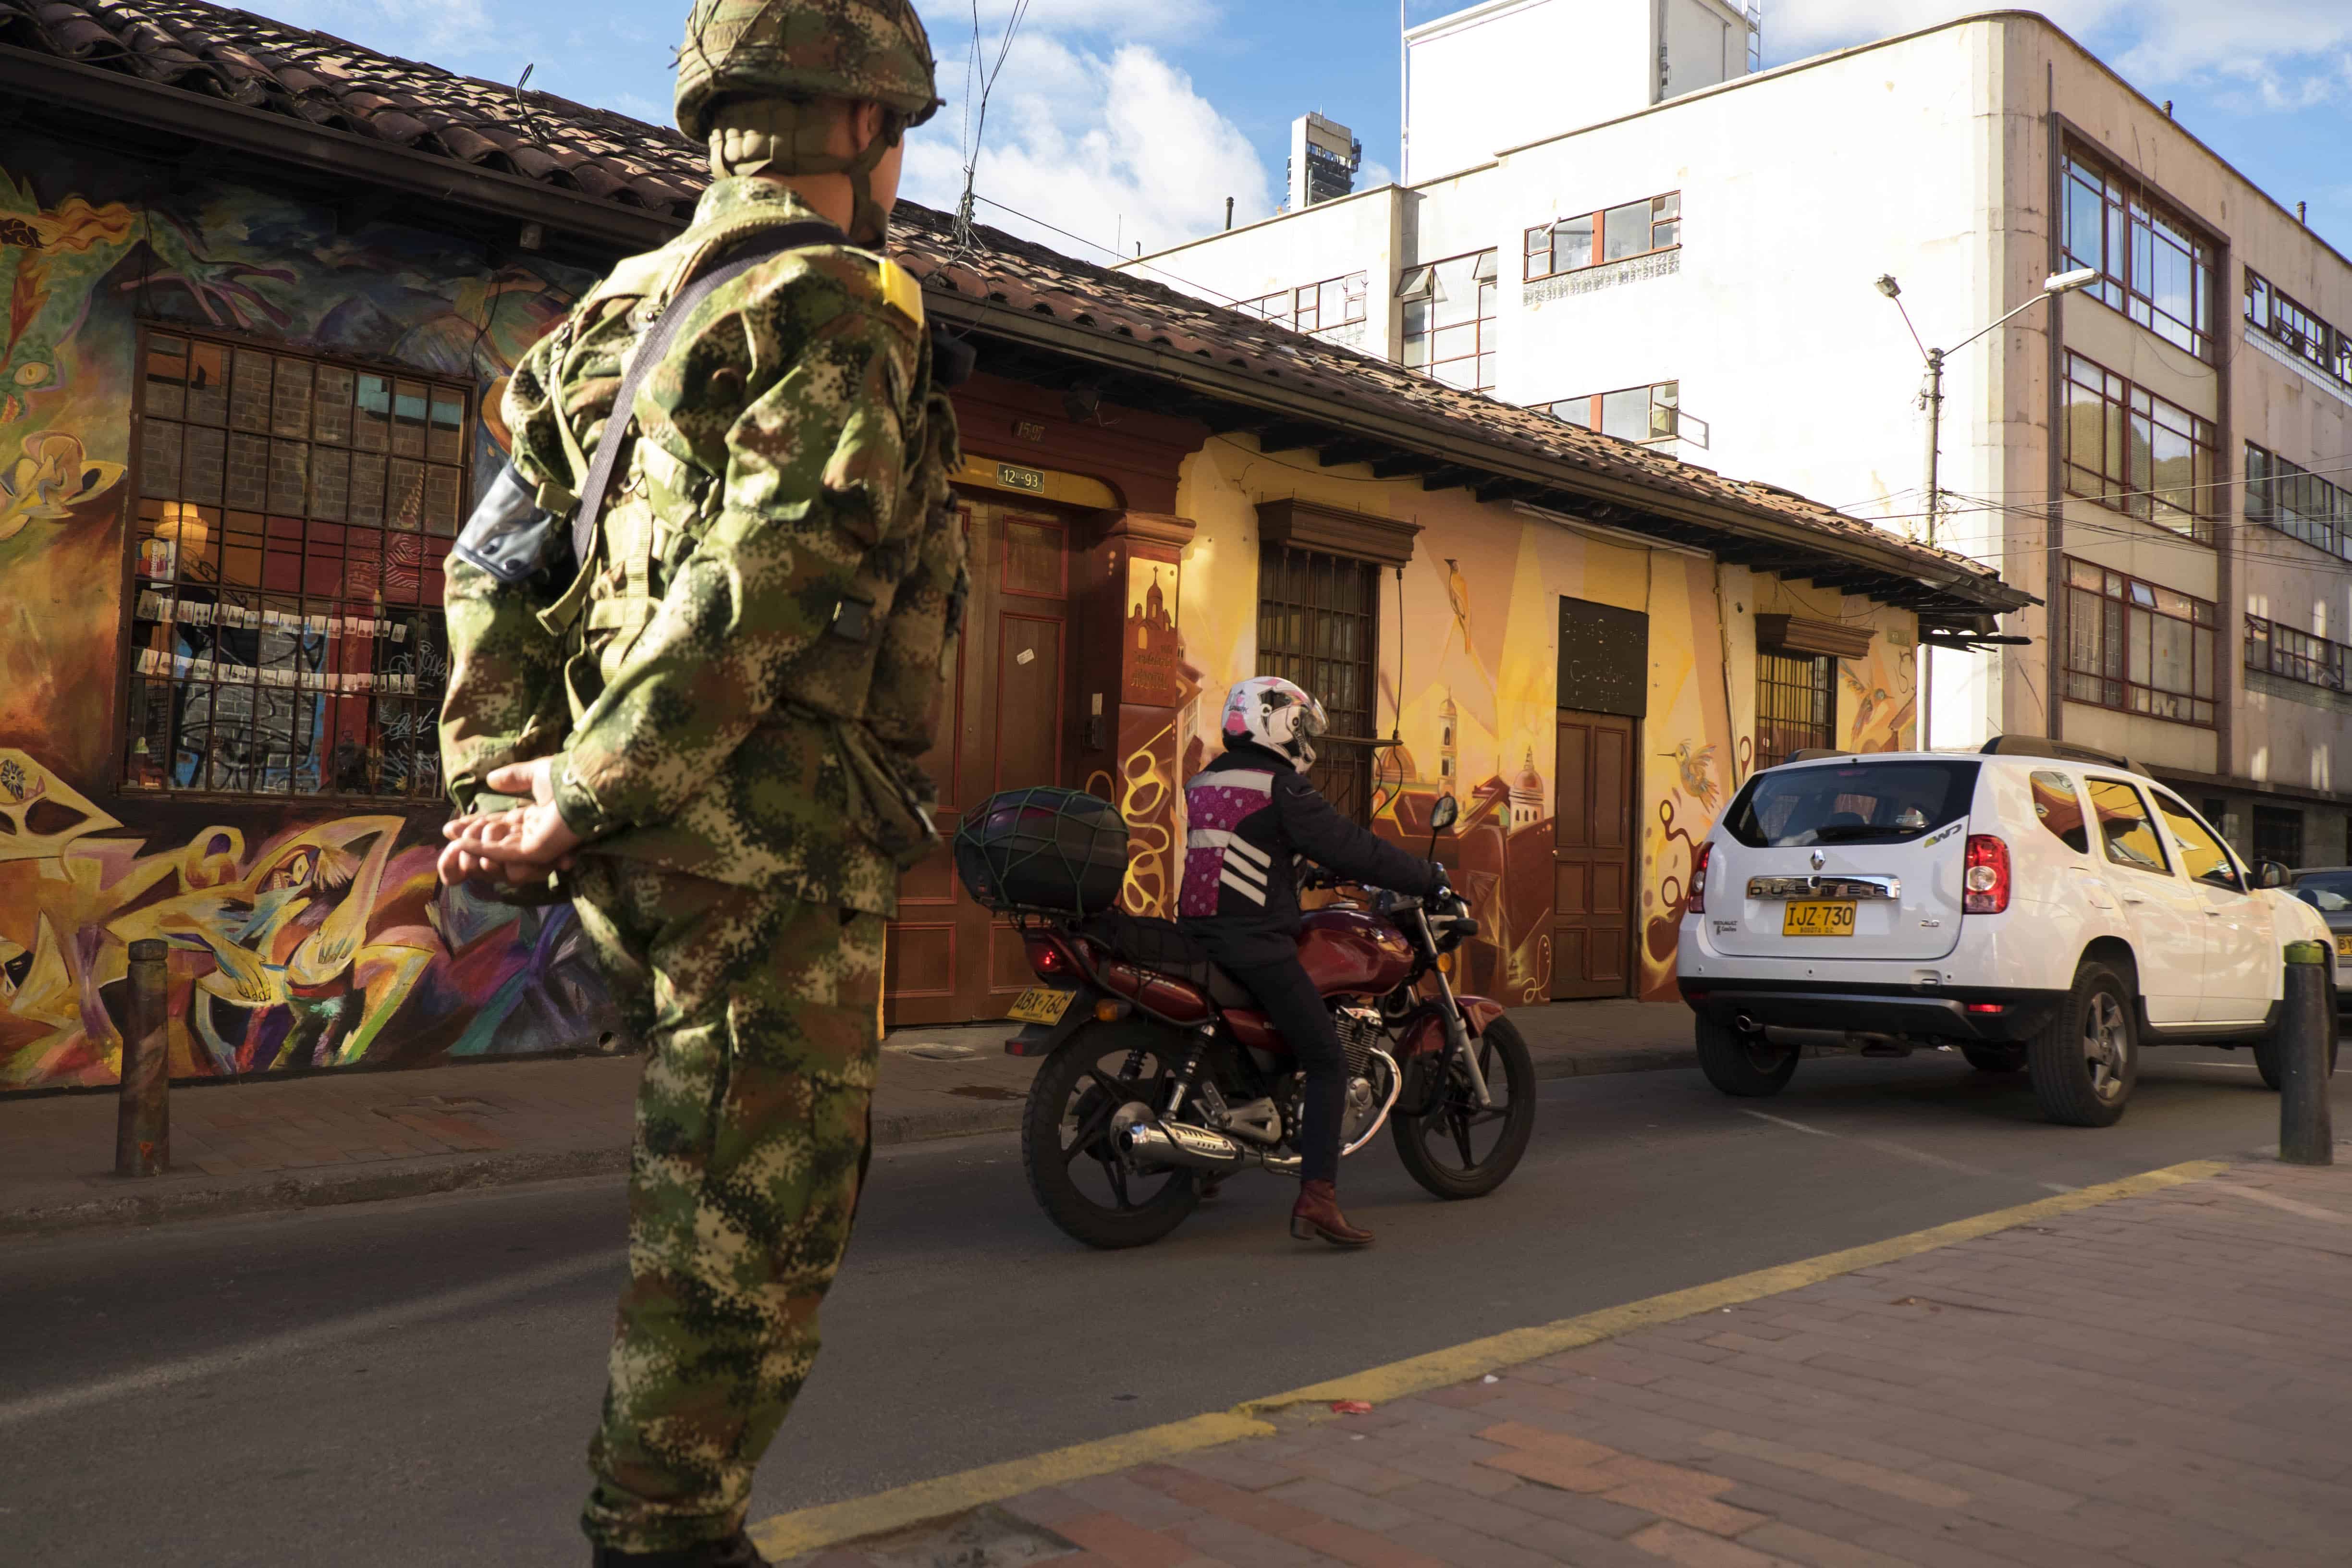 Colombia military: A soldier walks through the touristic area of Candelaria, Bogota.